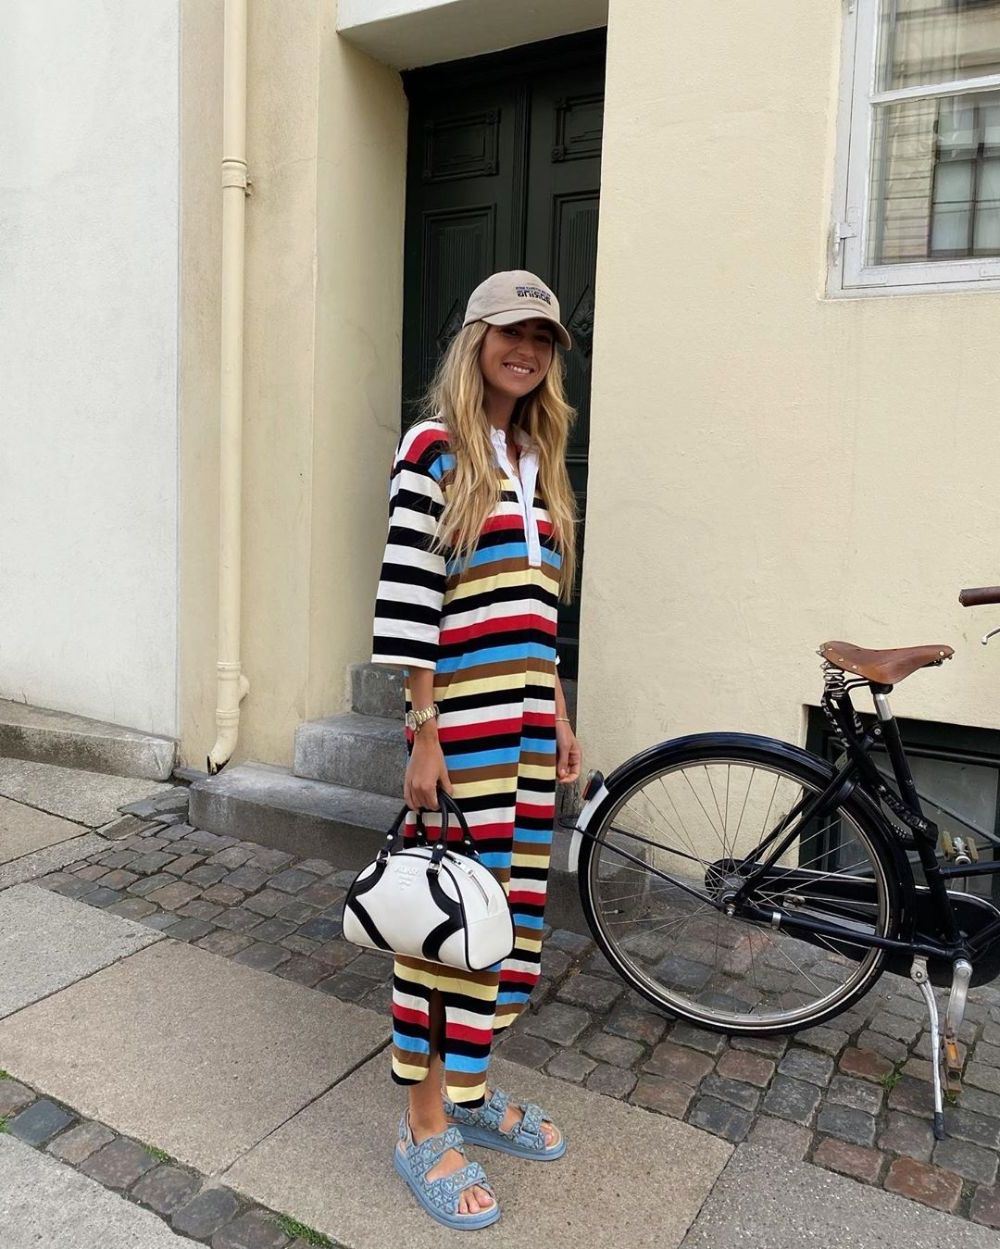 Striped Outfit Ideas For Spring: My Favorite Ideas To Try Now 2022